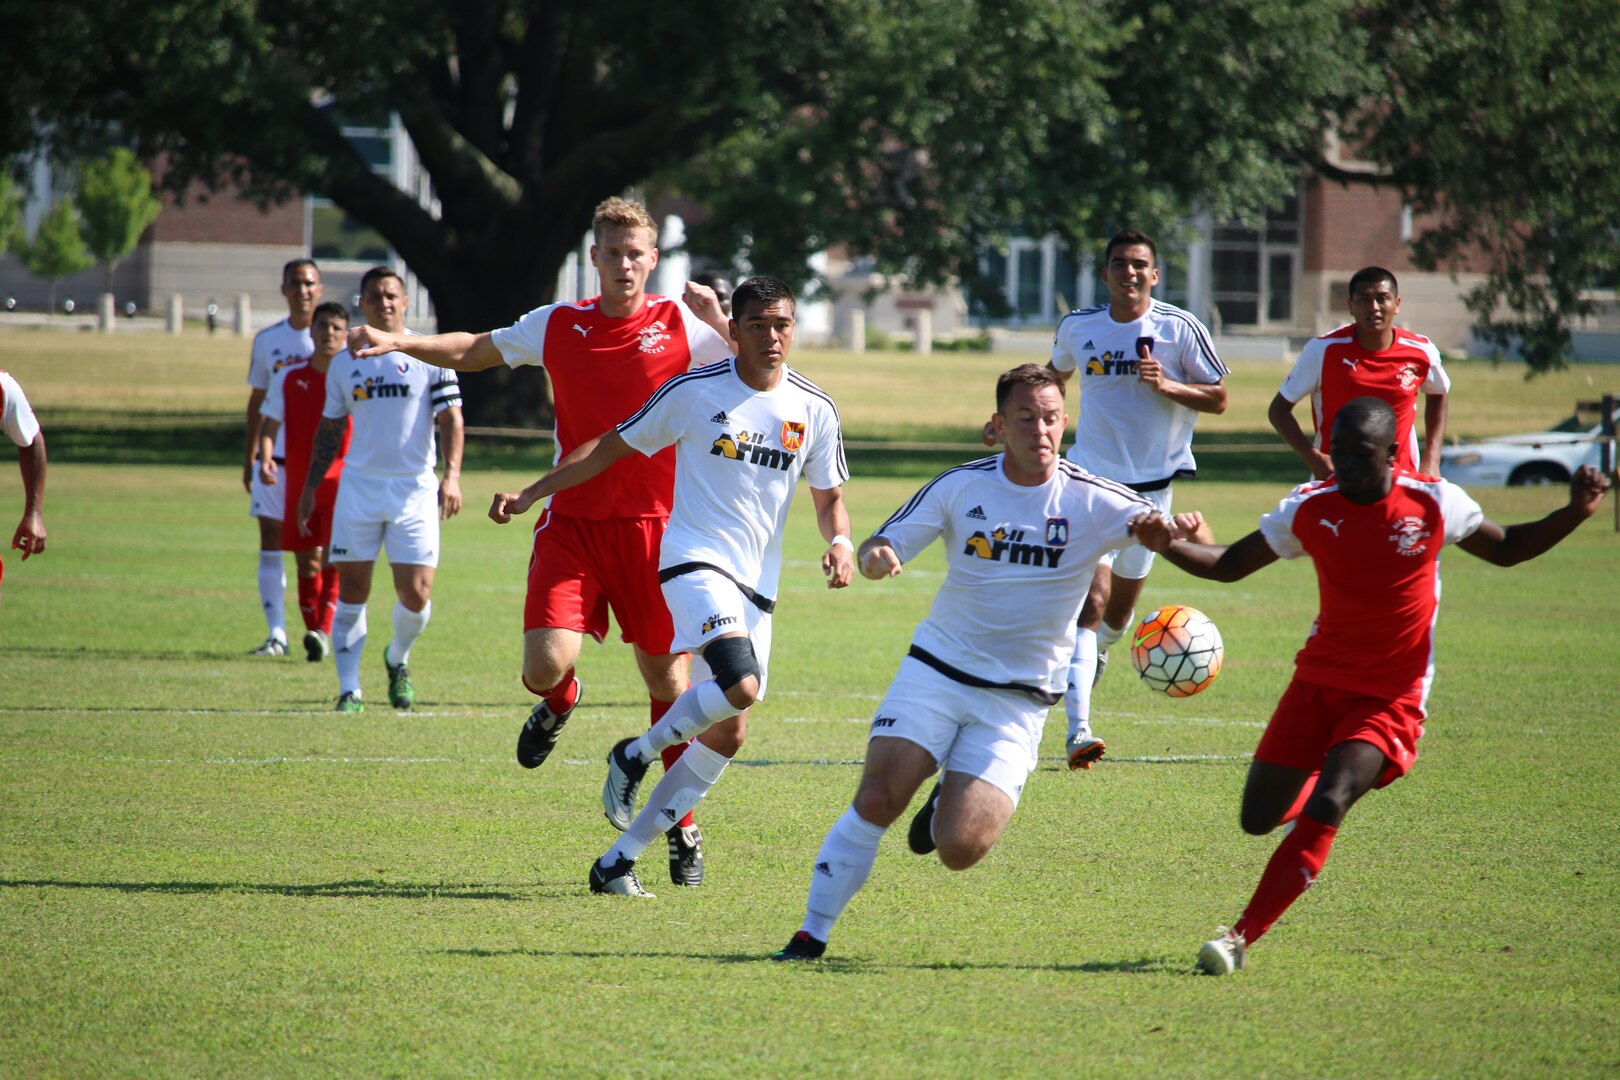 Fort Benning, Ga. - Army Capt Andrew Hyres (center with ball) drives down the field on the opening 30 seconds of the match to put Army on the board 1-0 of the consolation match of the 2016 Armed Forces Men's Soccer Championship hosted at Fort Benning, Ga from 6-14 May 2016.  Marine Corps would win the match 3-2, placing them third overall and Army in fourth.